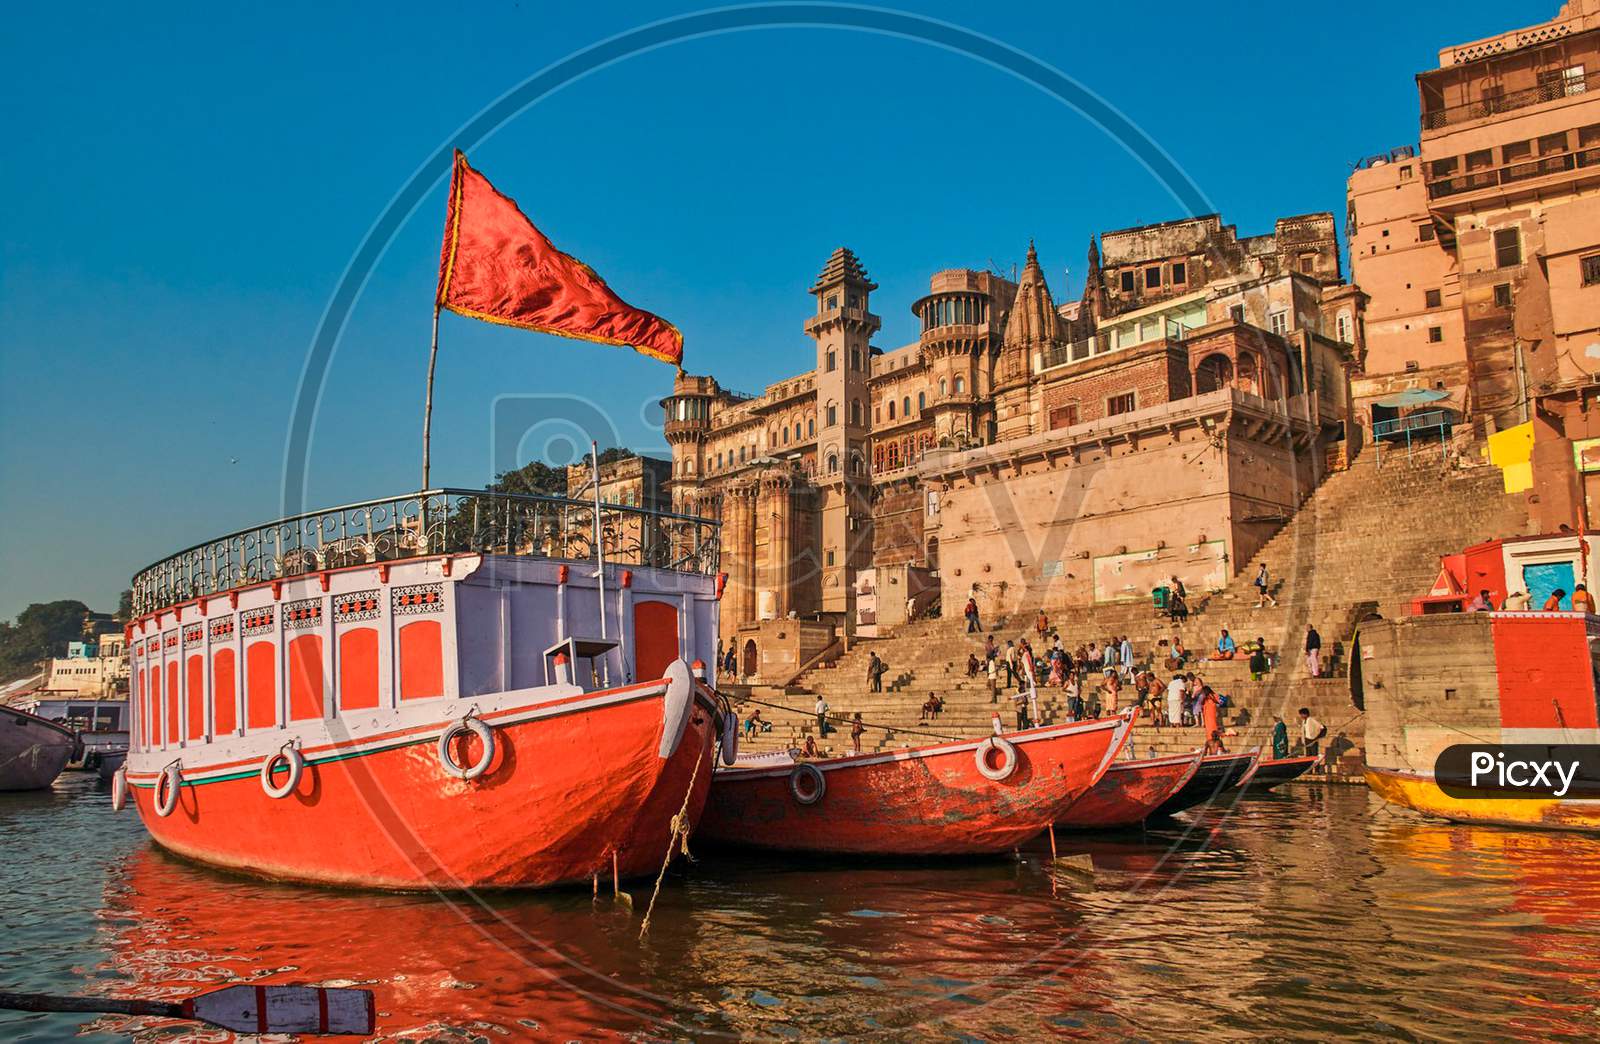 Varanasi Also Known As Benares, Banaras Or Kashi Is A City On The Banks Of The River Ganges In Uttar Pradesh, India